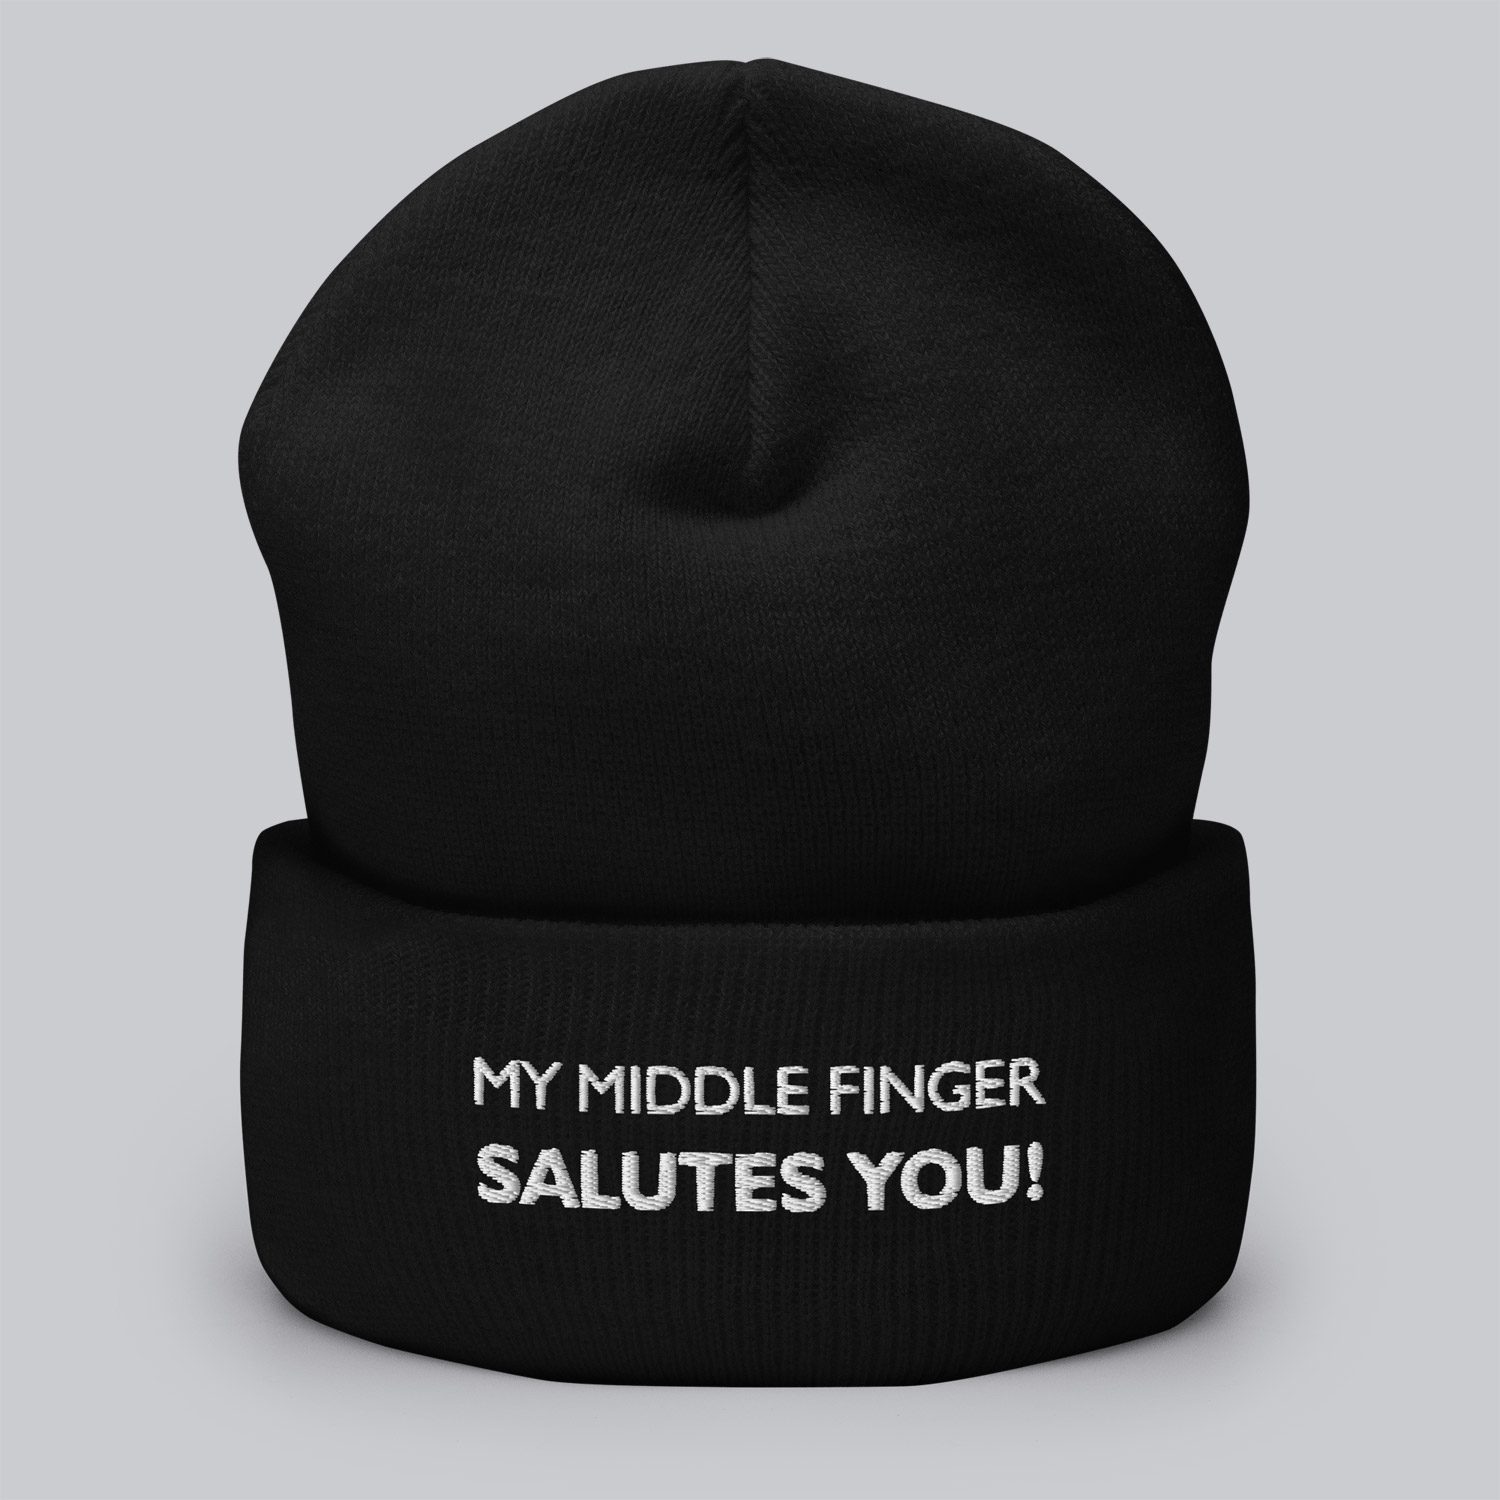 My middle finger salutes you | Cuffed Beanie